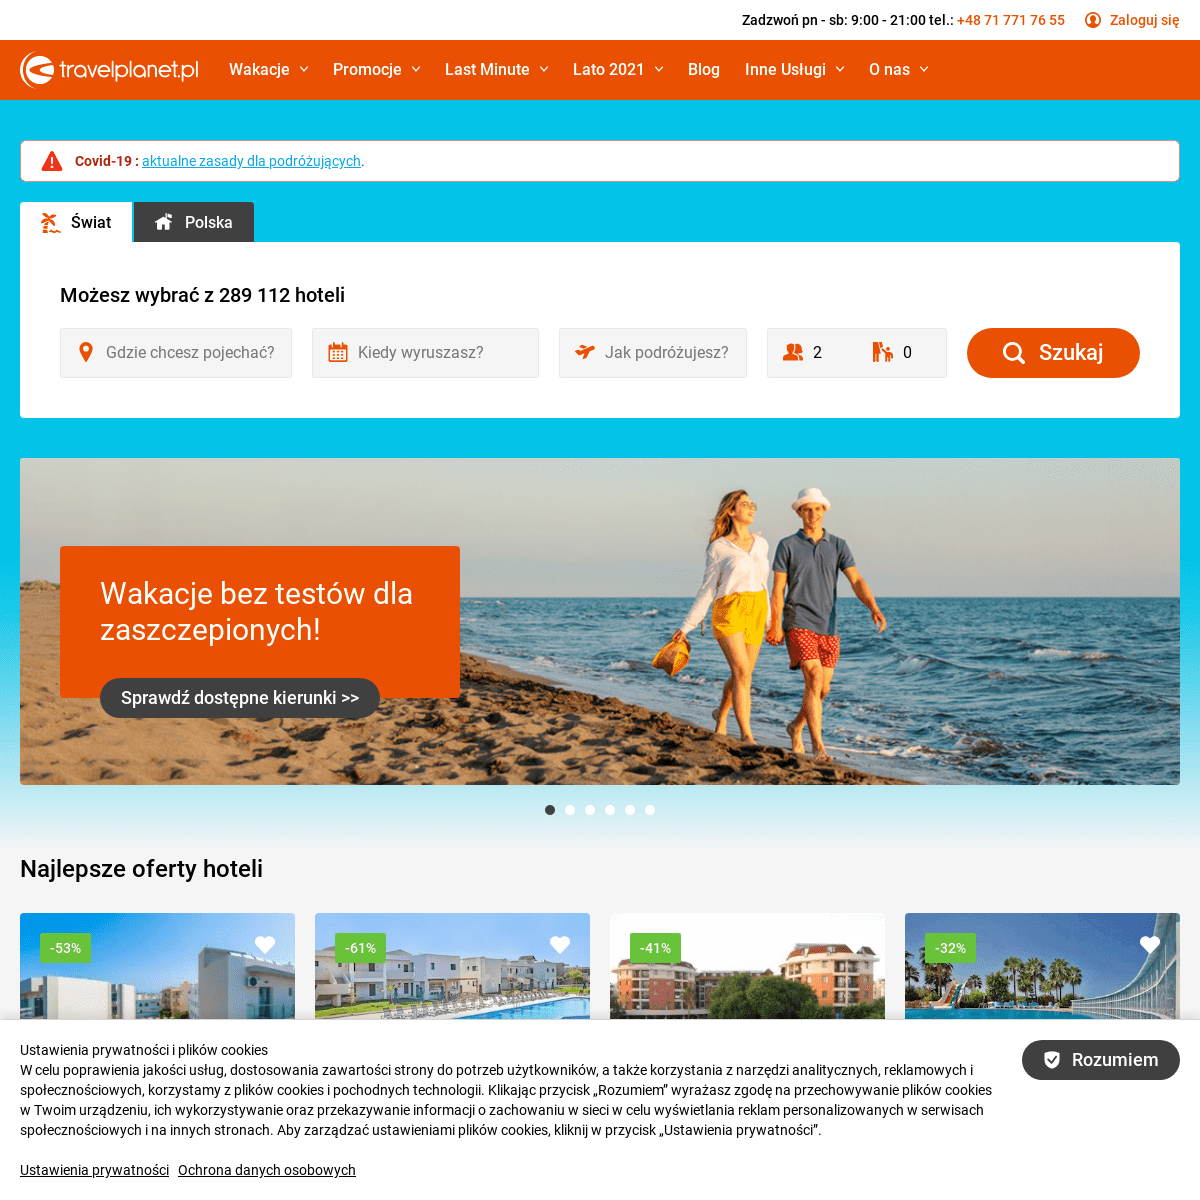 A complete backup of https://travelplanet.pl